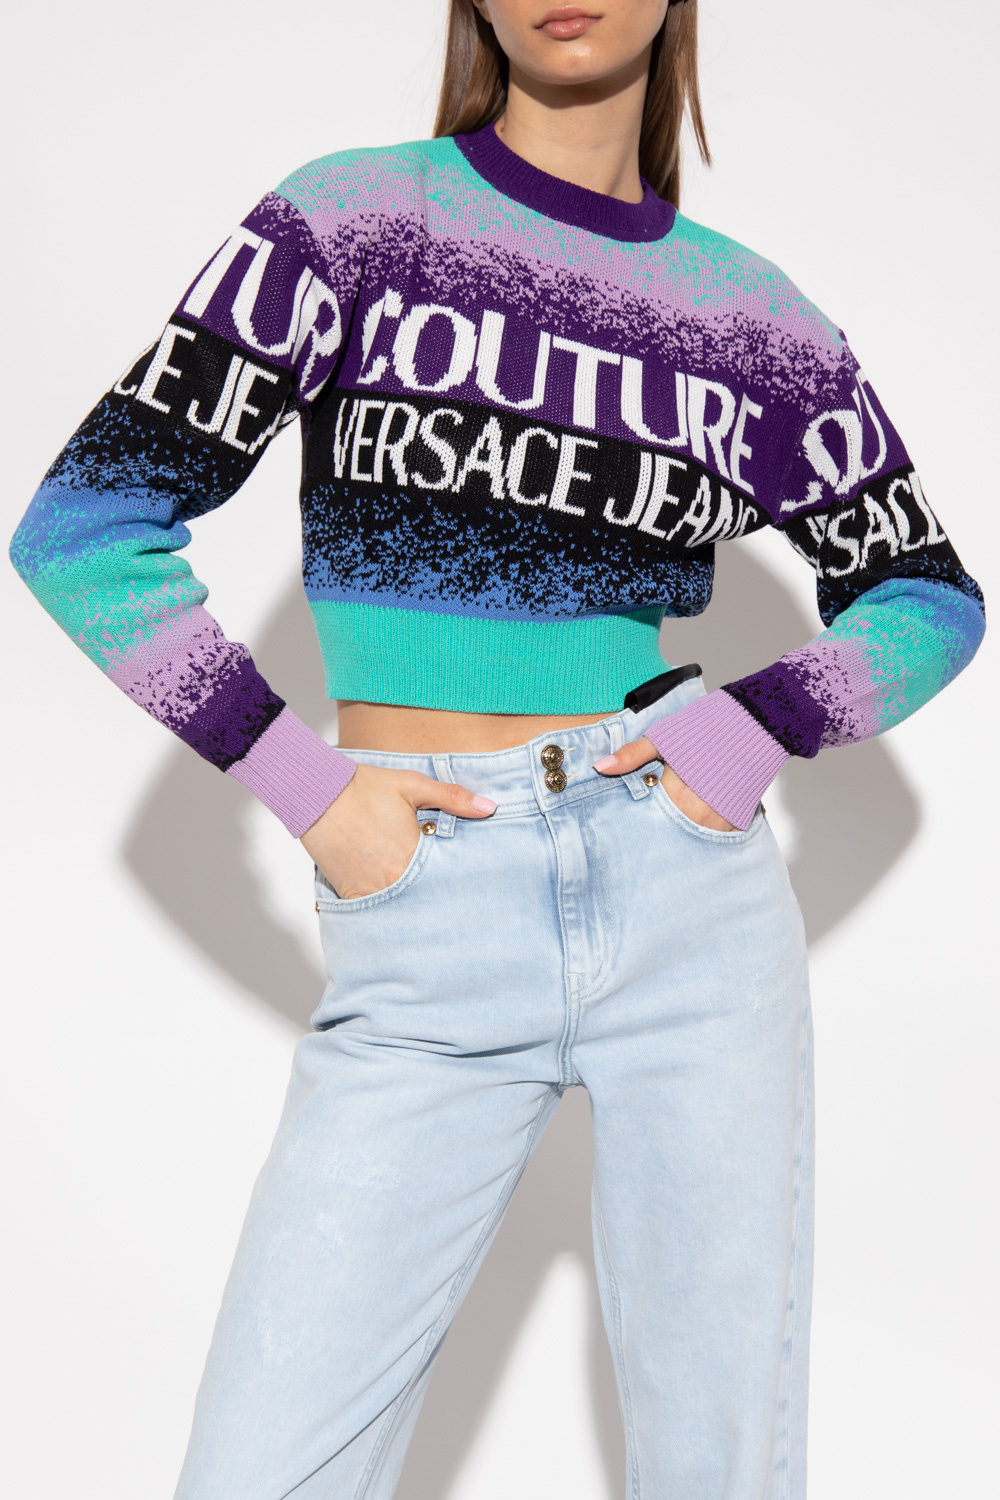 Versace Jeans Couture Patterned Sleeve sweater